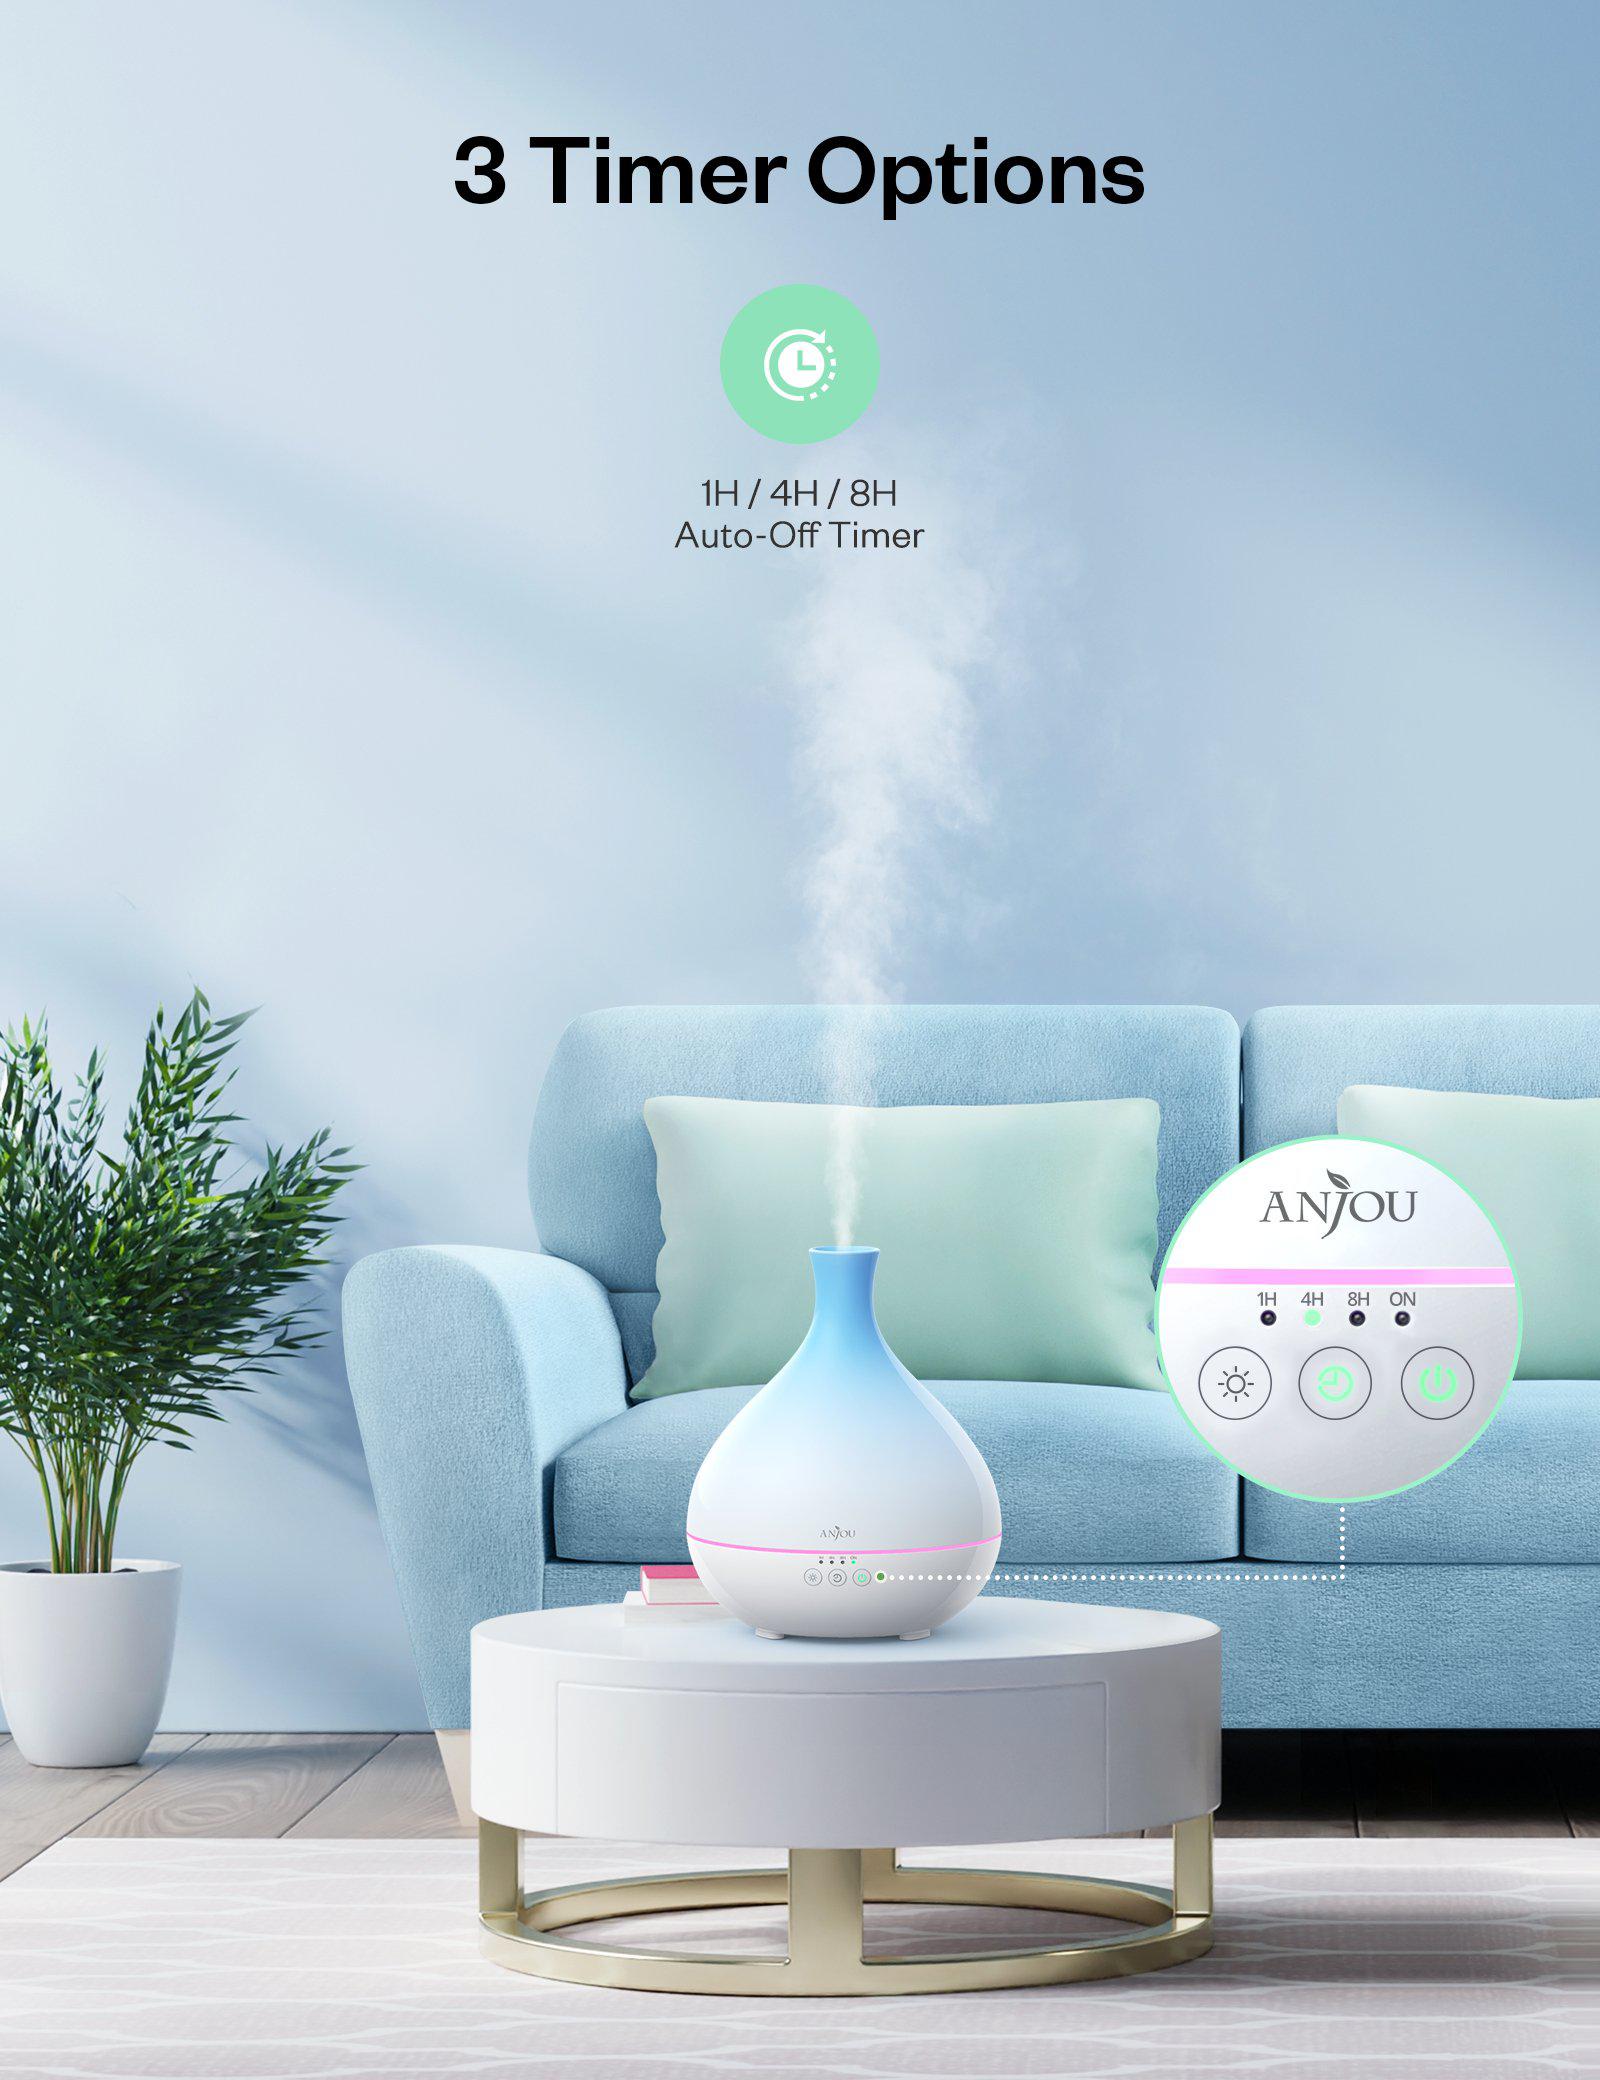 Essential Oil Diffuser 500ml Cool Mist Humidifier 12hrs Consistent Scent-TaoTronics US